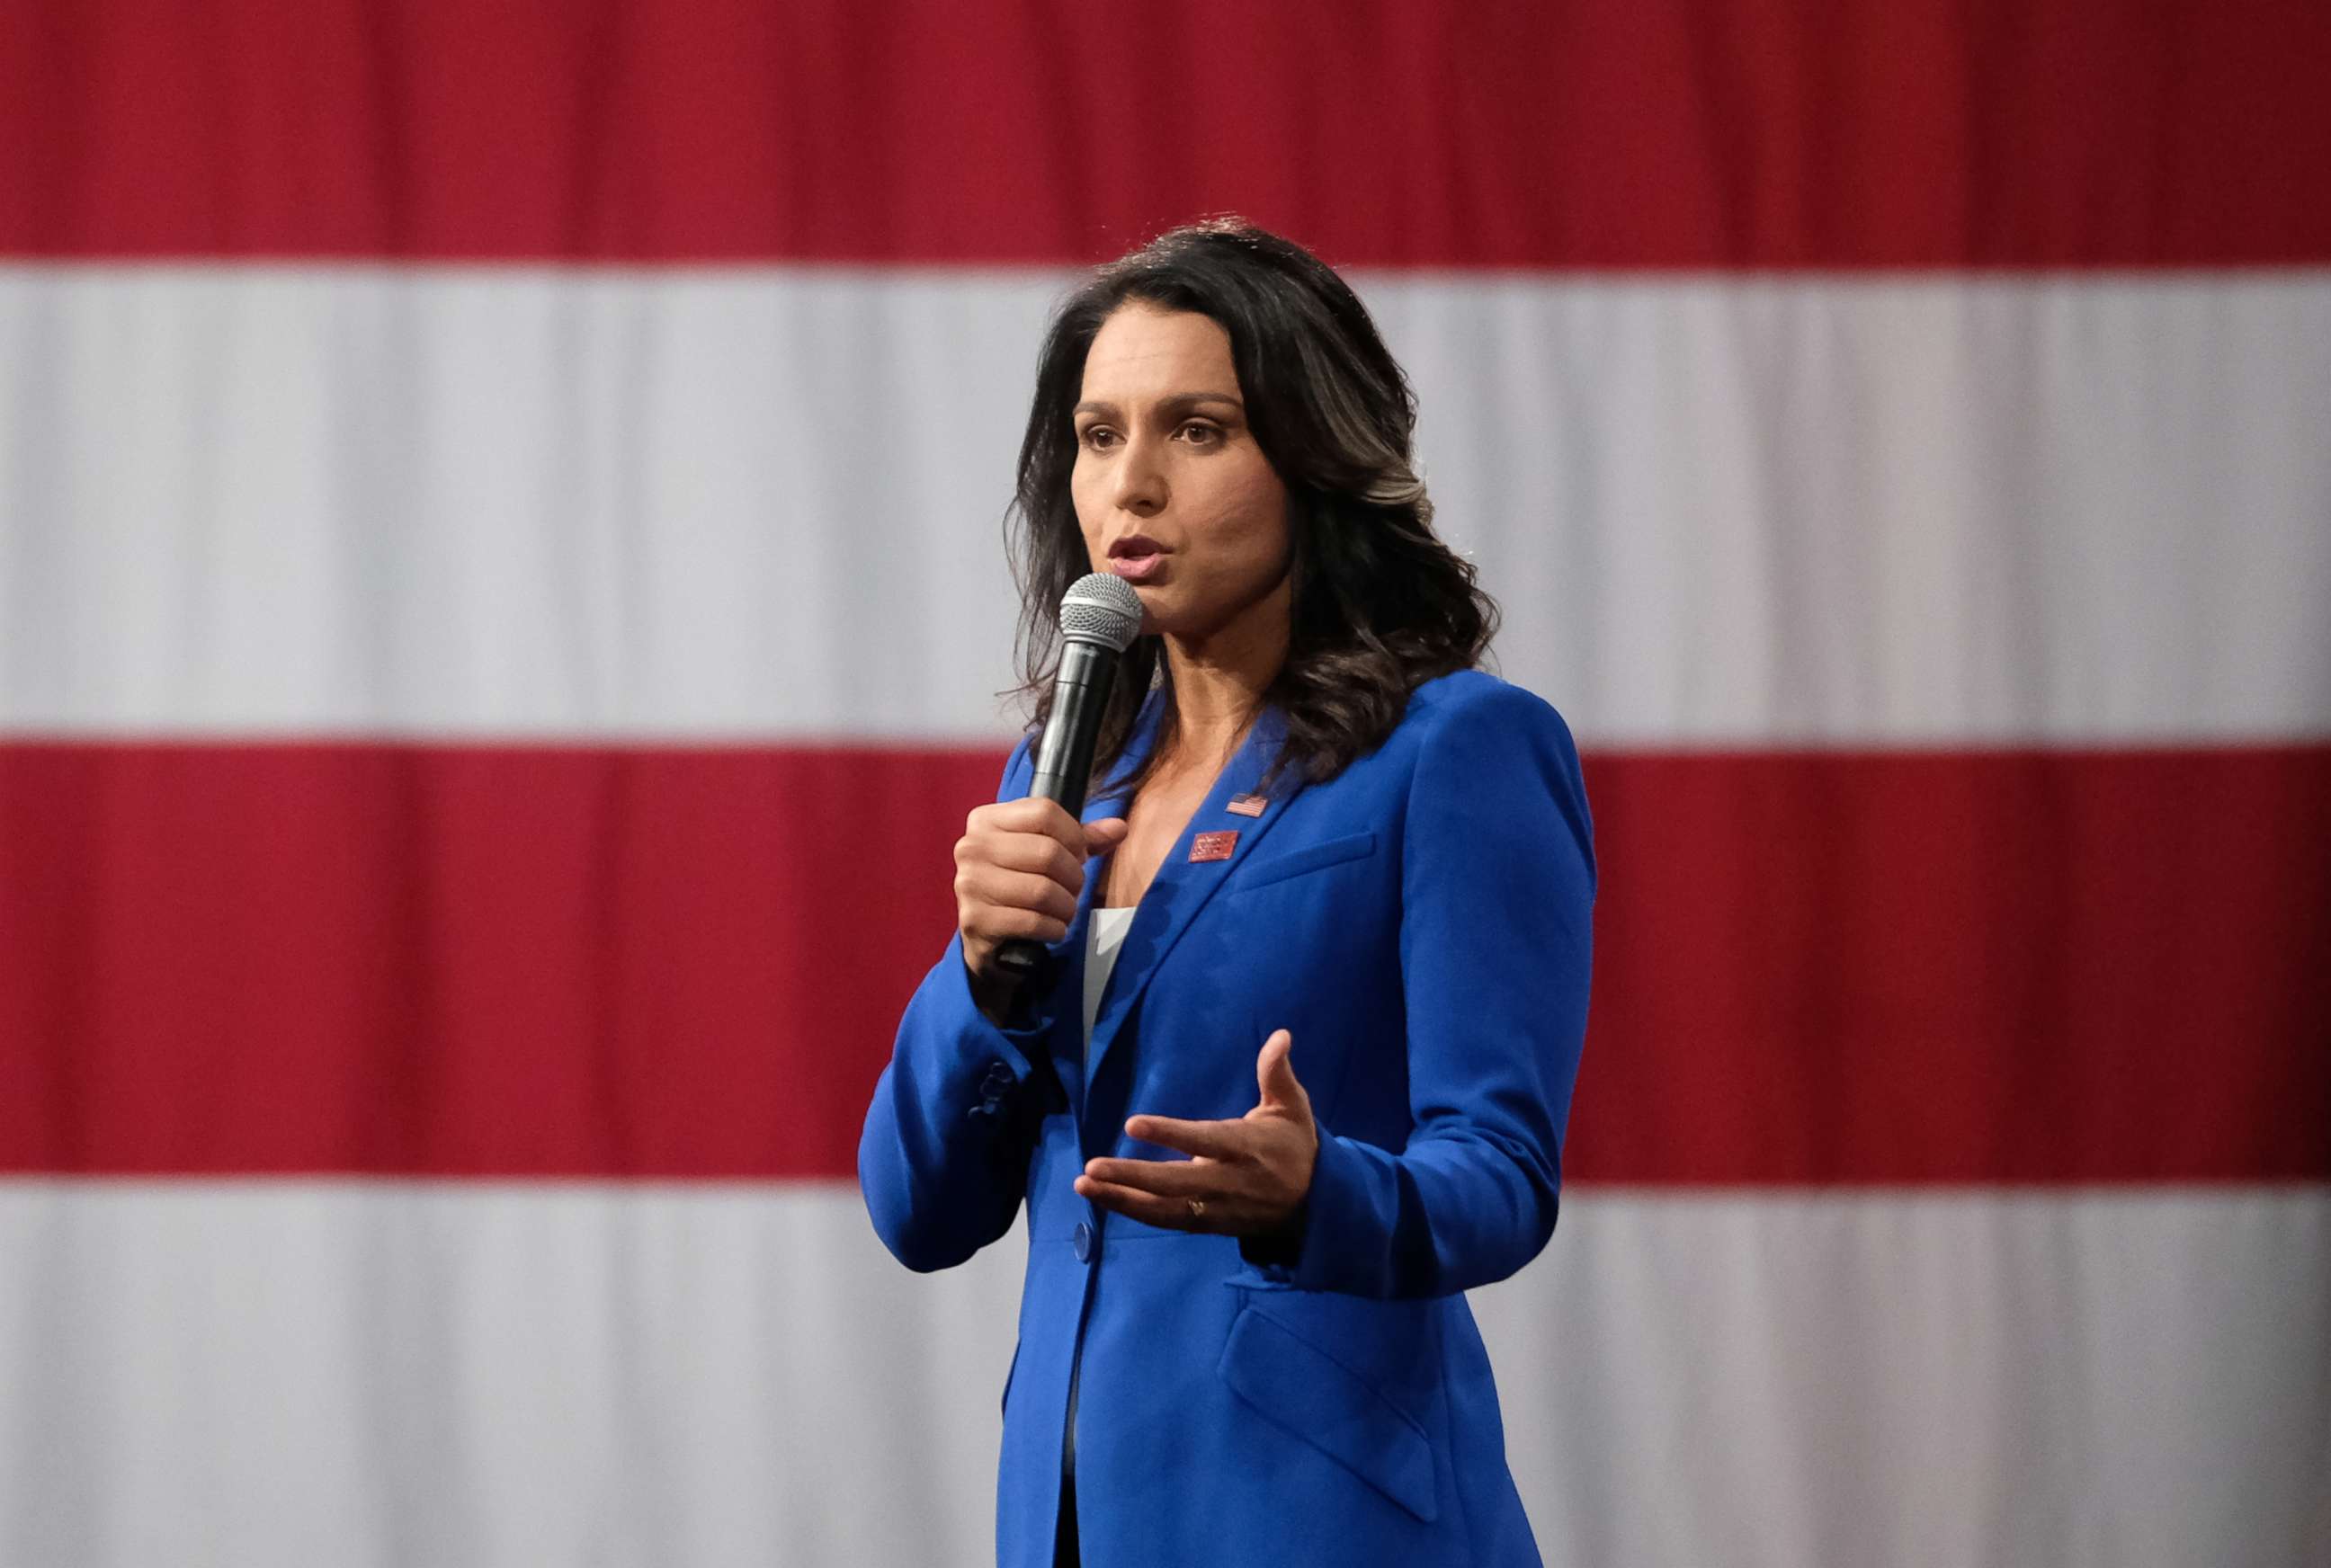 PHOTO: Representative Tulsi Gabbard, a Democrat from Hawaii and 2020 presidential candidate, speaks during the Everytown for Gun Safety Presidential Gun Sense Forum, in Des Moines Iowa, U.S., on Saturday, Aug. 10, 2019.